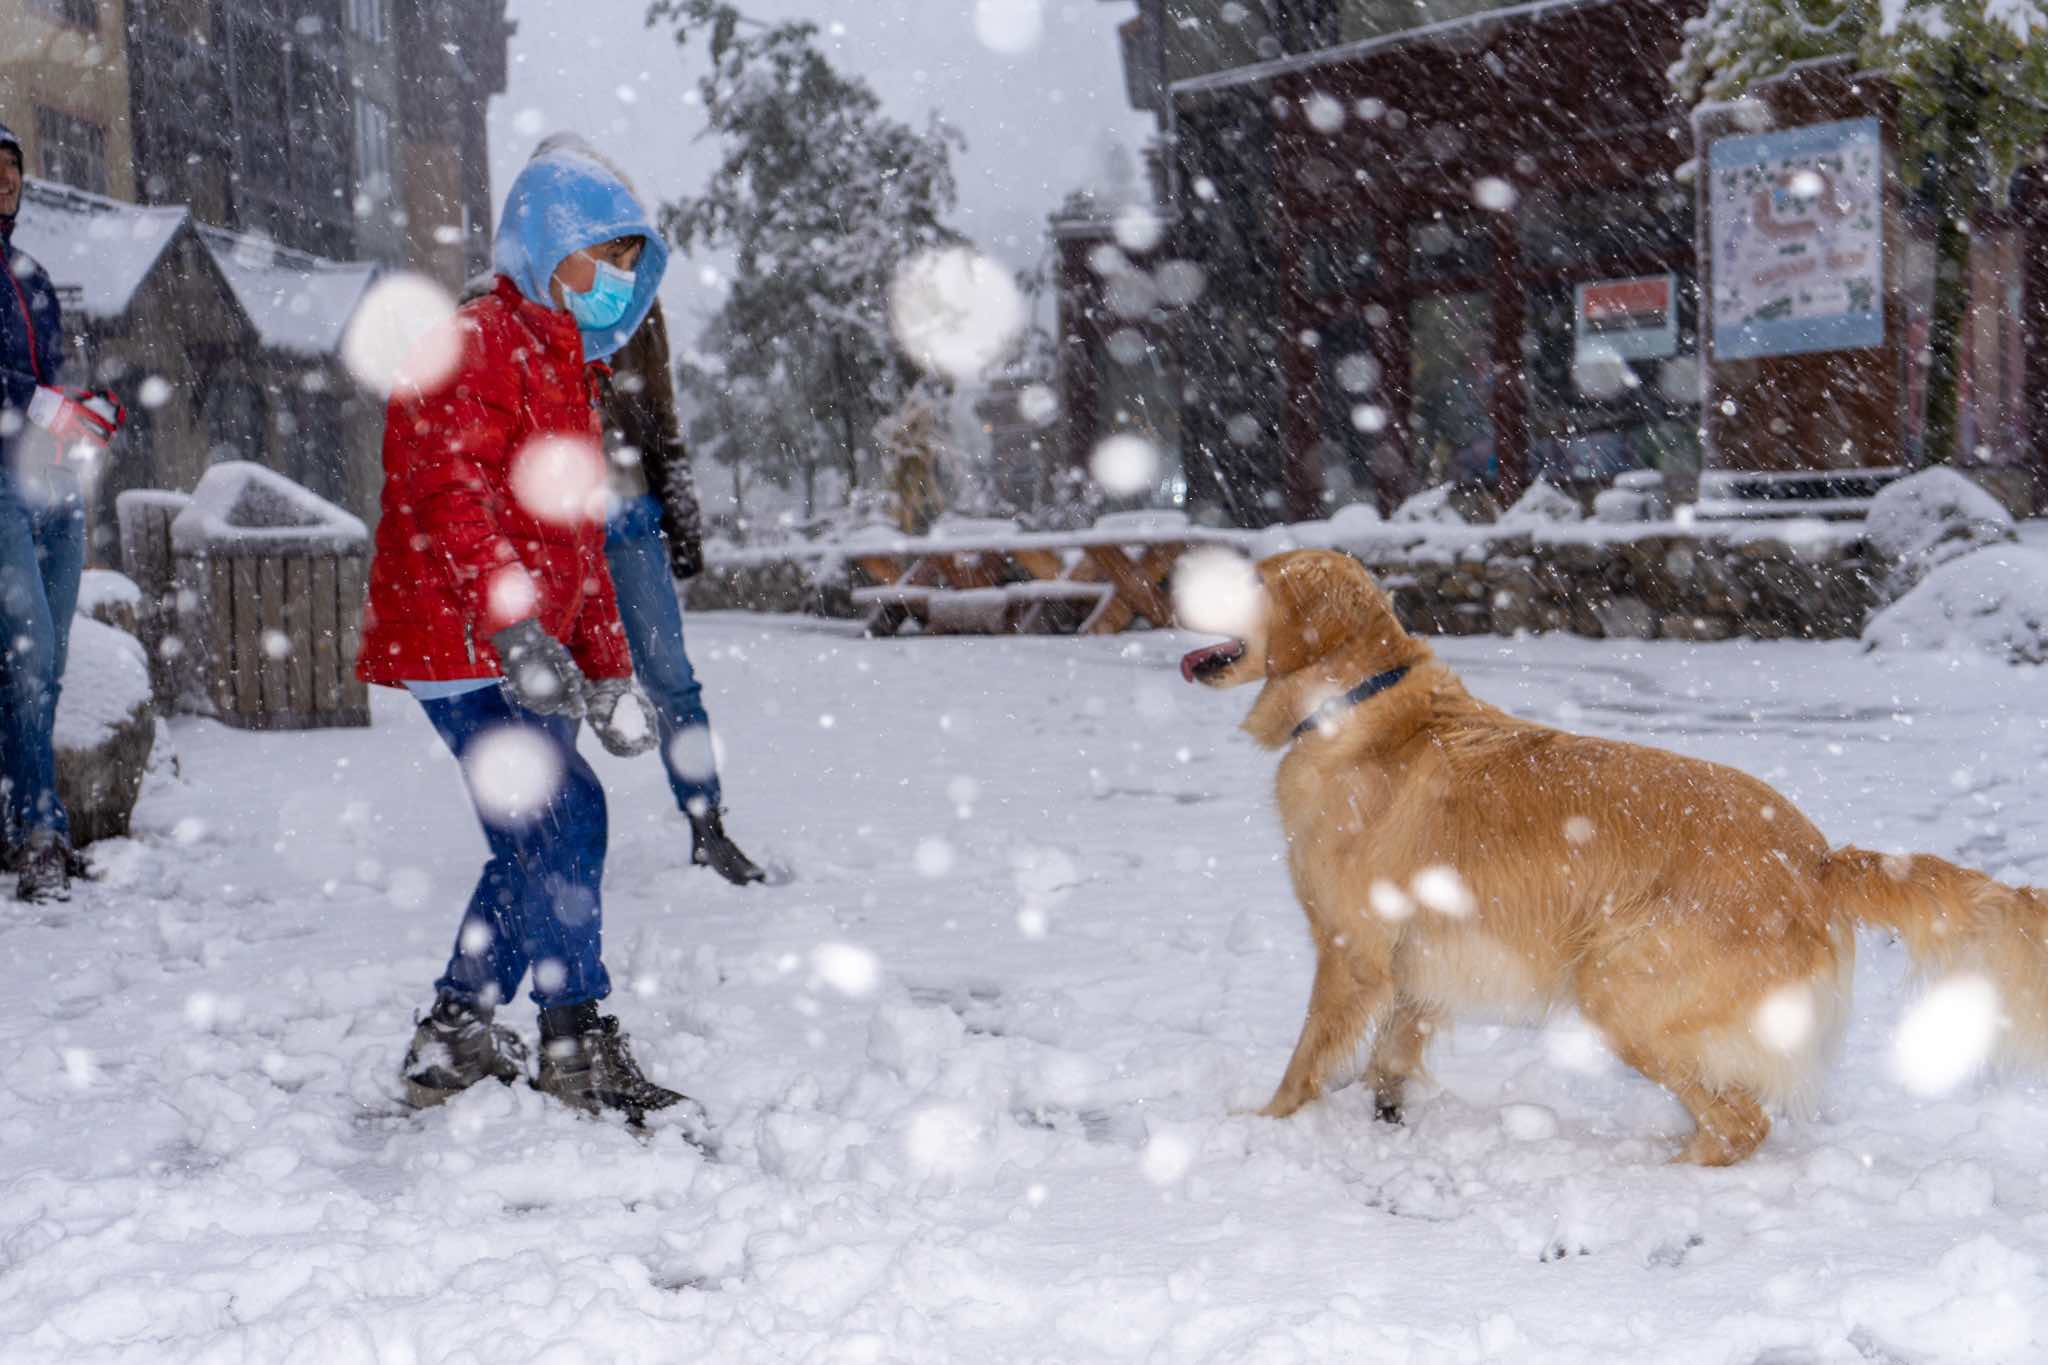 Dog and person at Mammoth Lakes in the winter